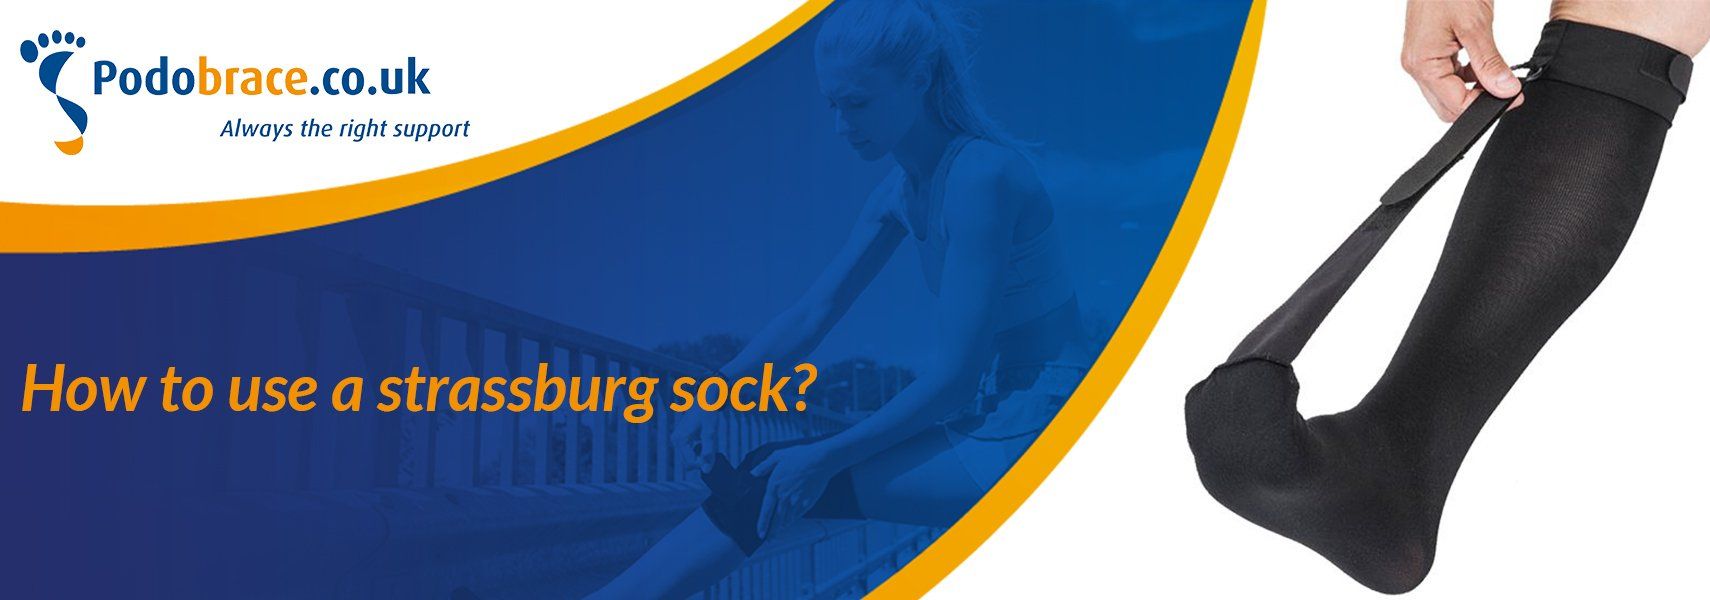 How to use a strassburg sock